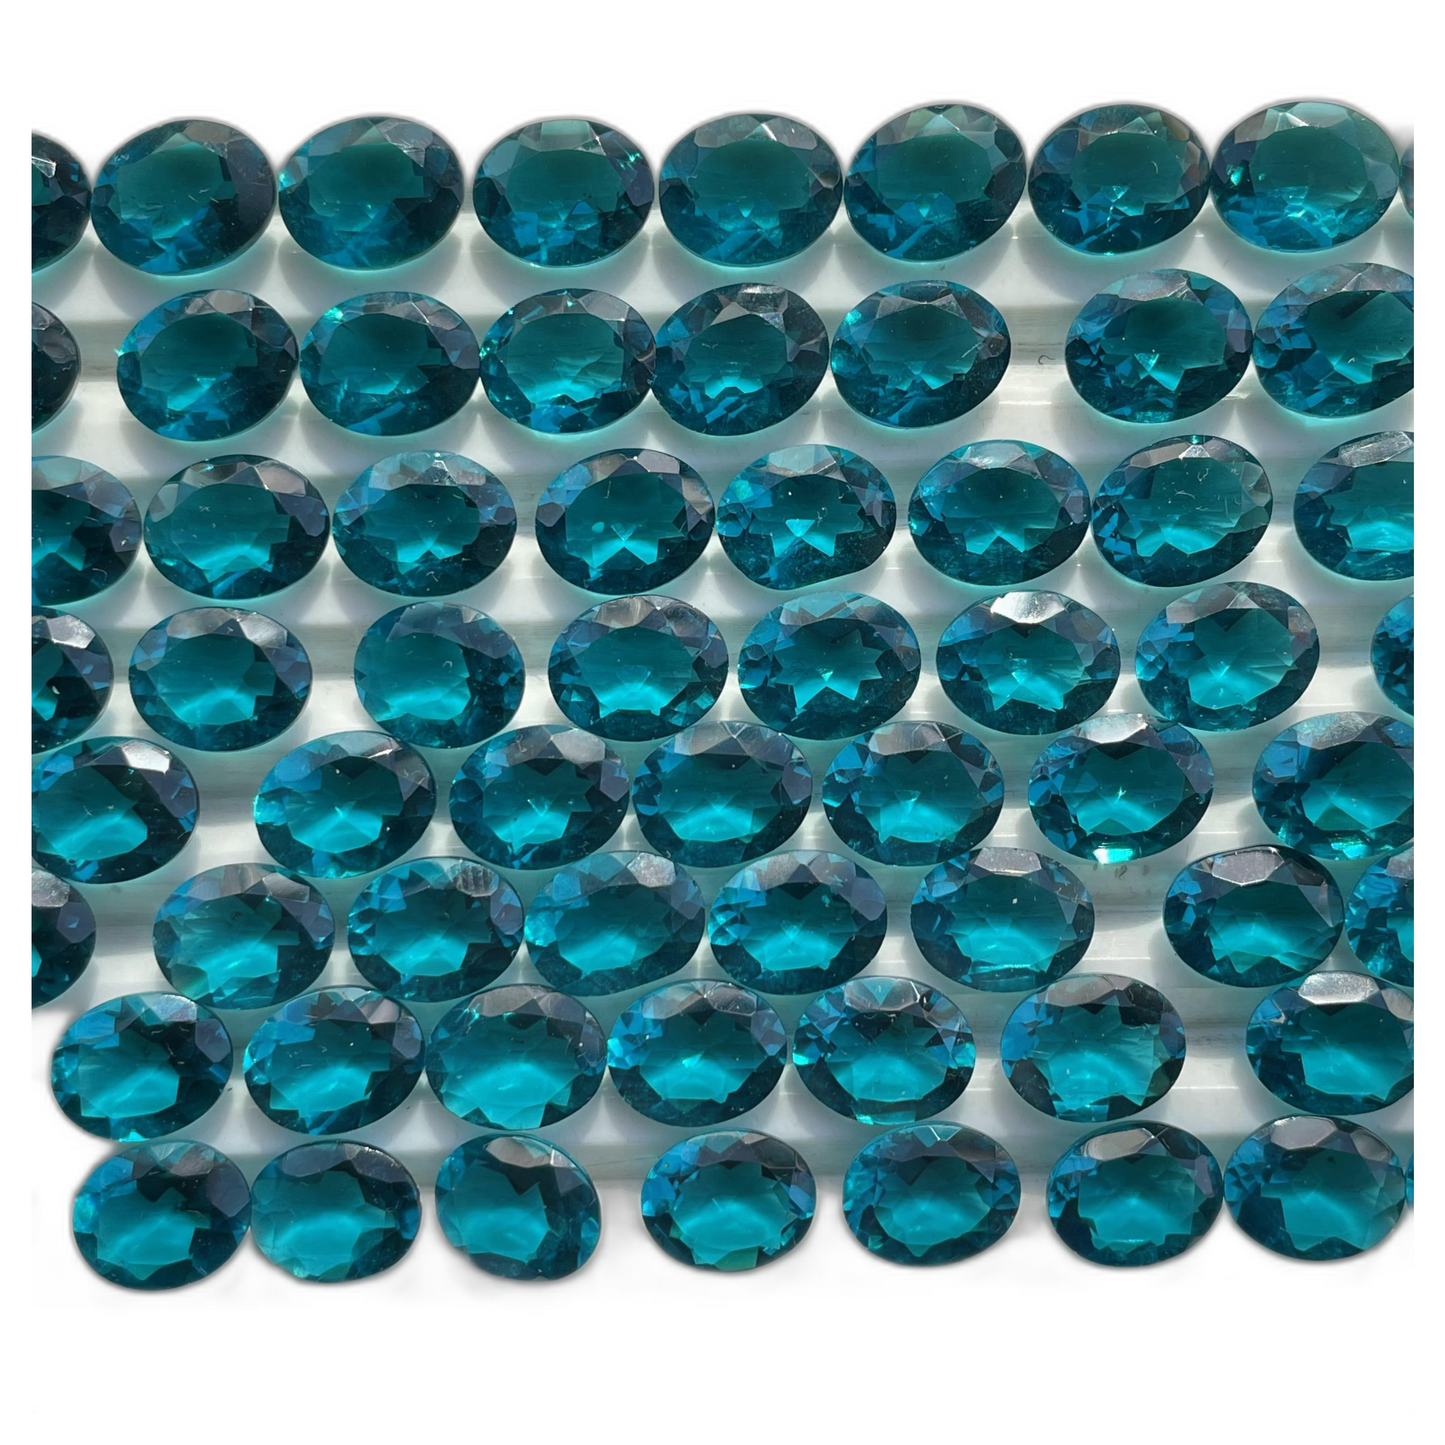 London Blue topaz Faceted Nice Quality (8-10 mm) Oval Shape